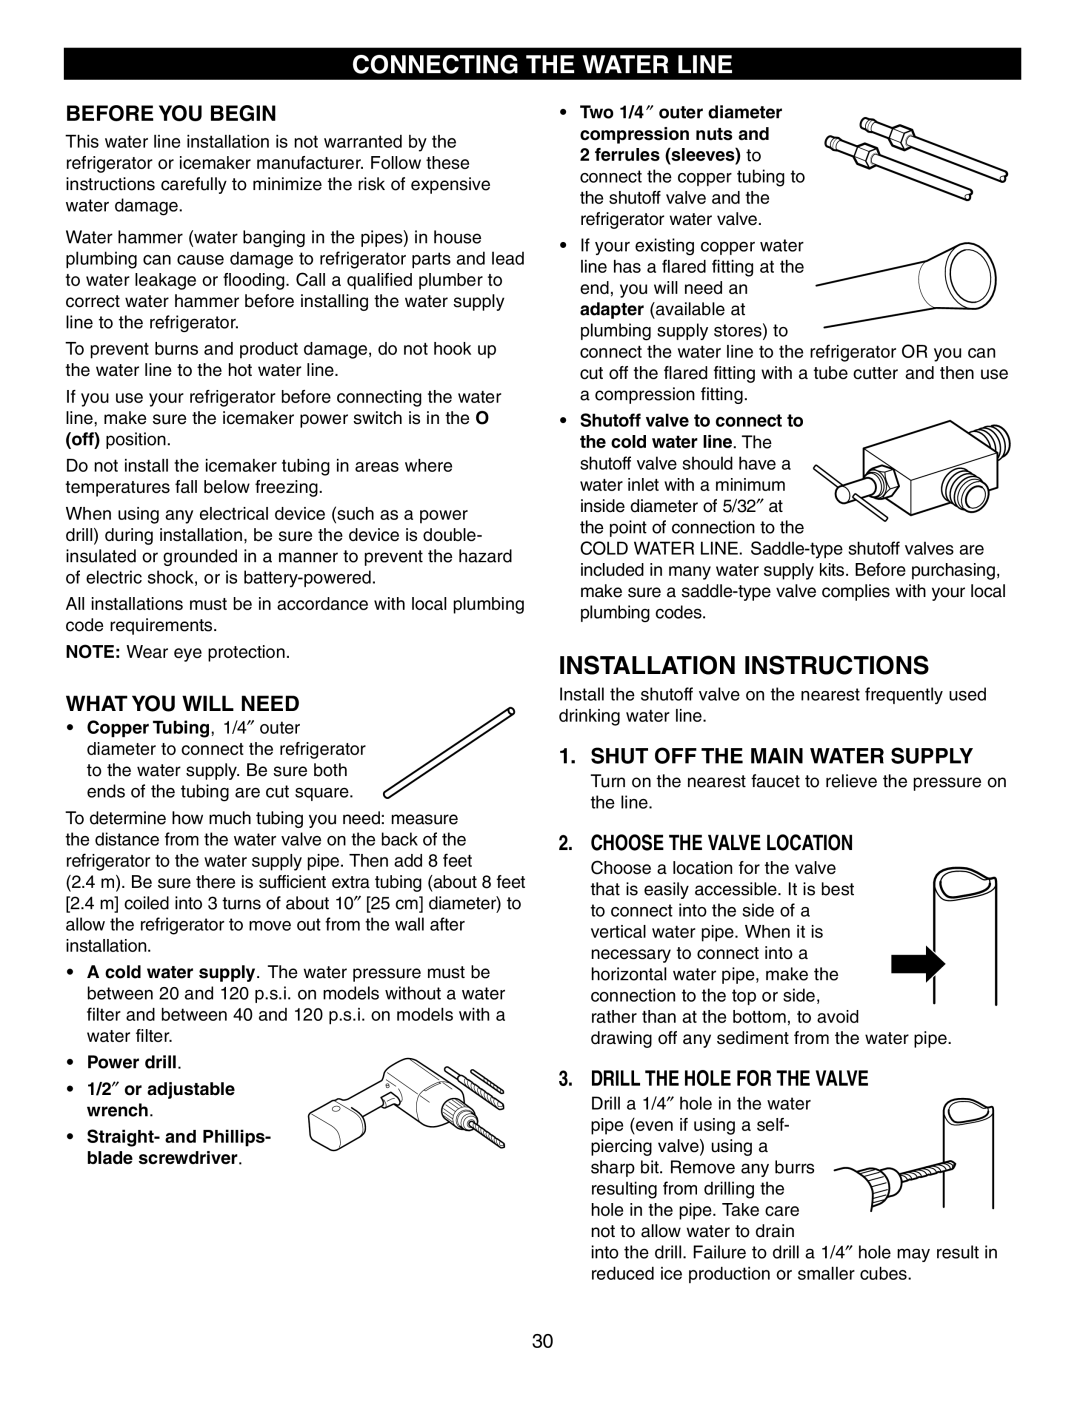 LG Electronics LFX25960 manual Connecting The Water Line, Installation Instructions, Before You Begin, What You Will Need 